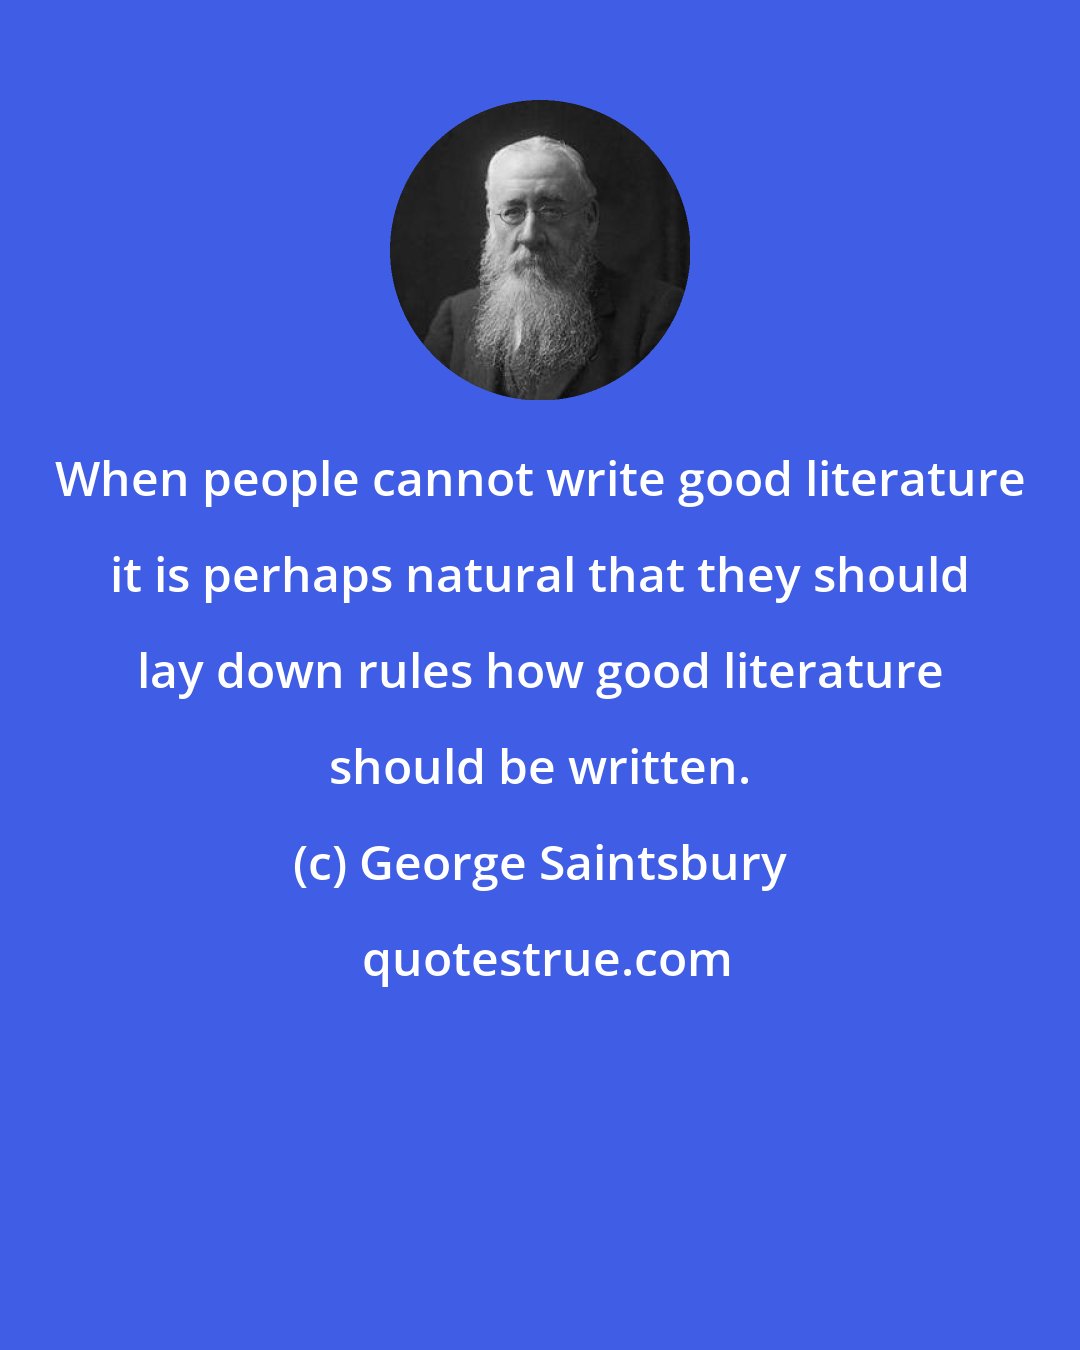 George Saintsbury: When people cannot write good literature it is perhaps natural that they should lay down rules how good literature should be written.